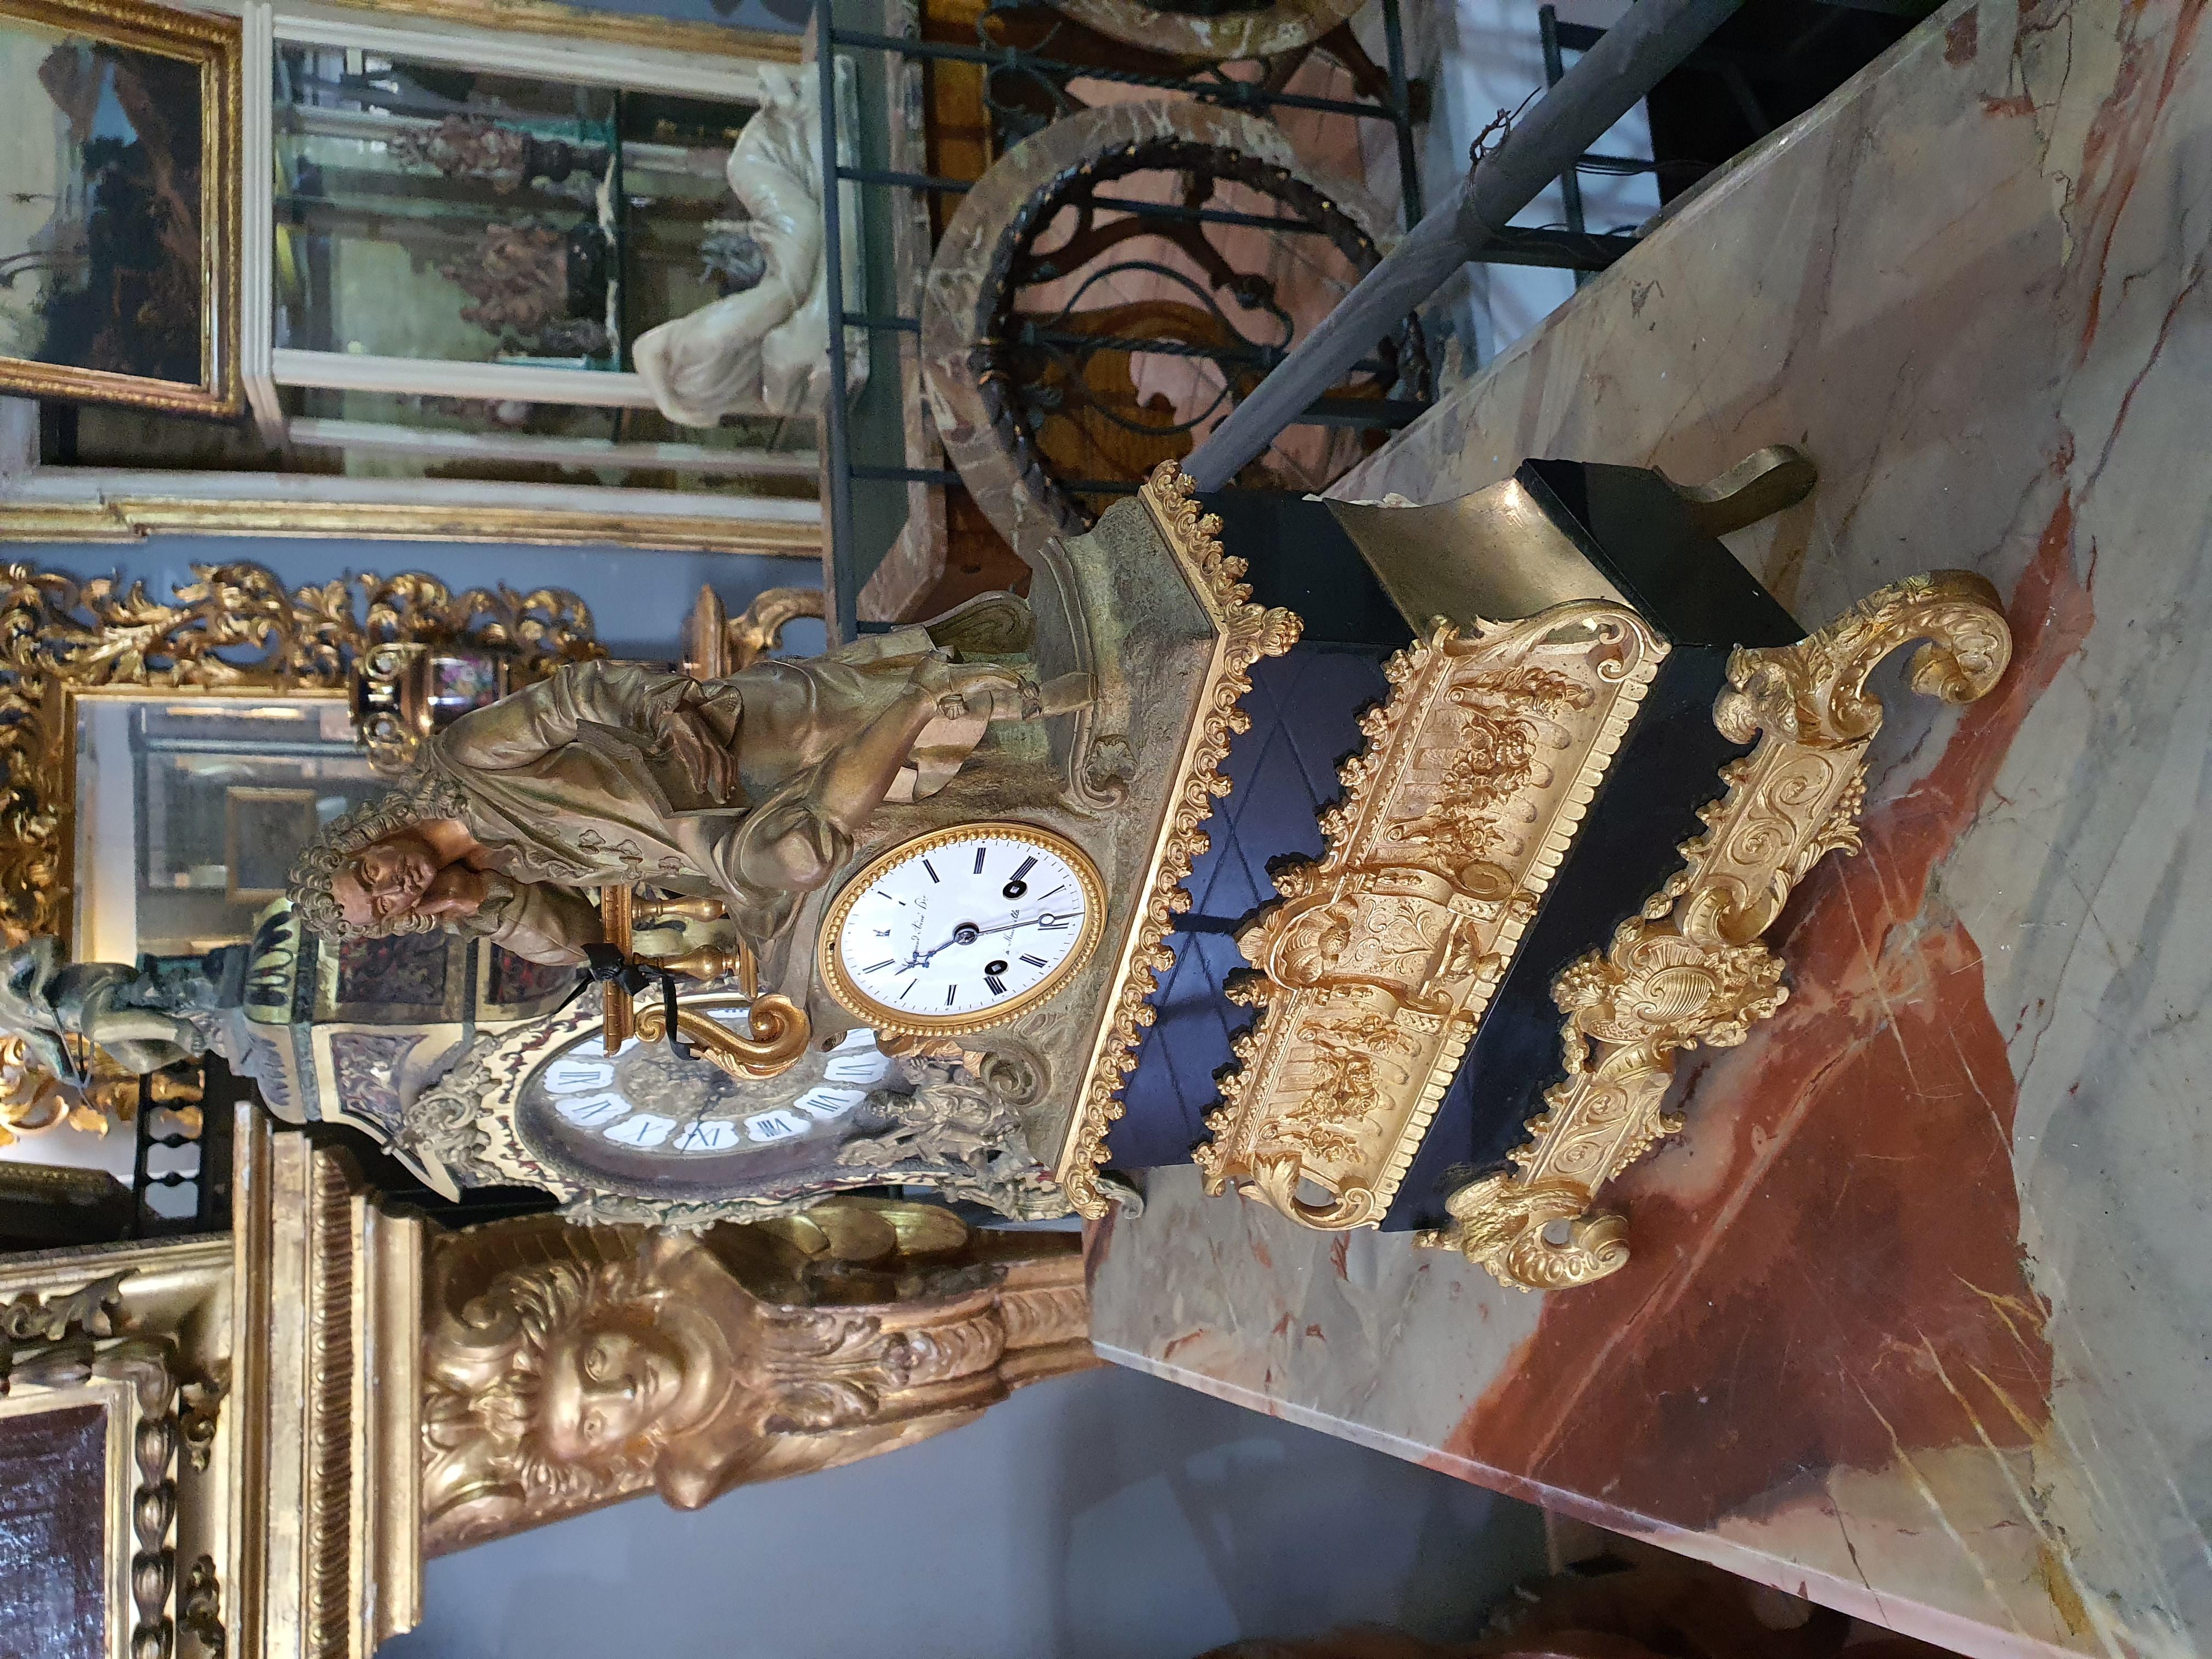 Clock composed of a structure with various orders, alternating between black marble and gilded bronze, on the top of which stands the patinated bronze sculpture of a man immersed in reading, probably Voltaire. White enamel dial Arabic numerals for